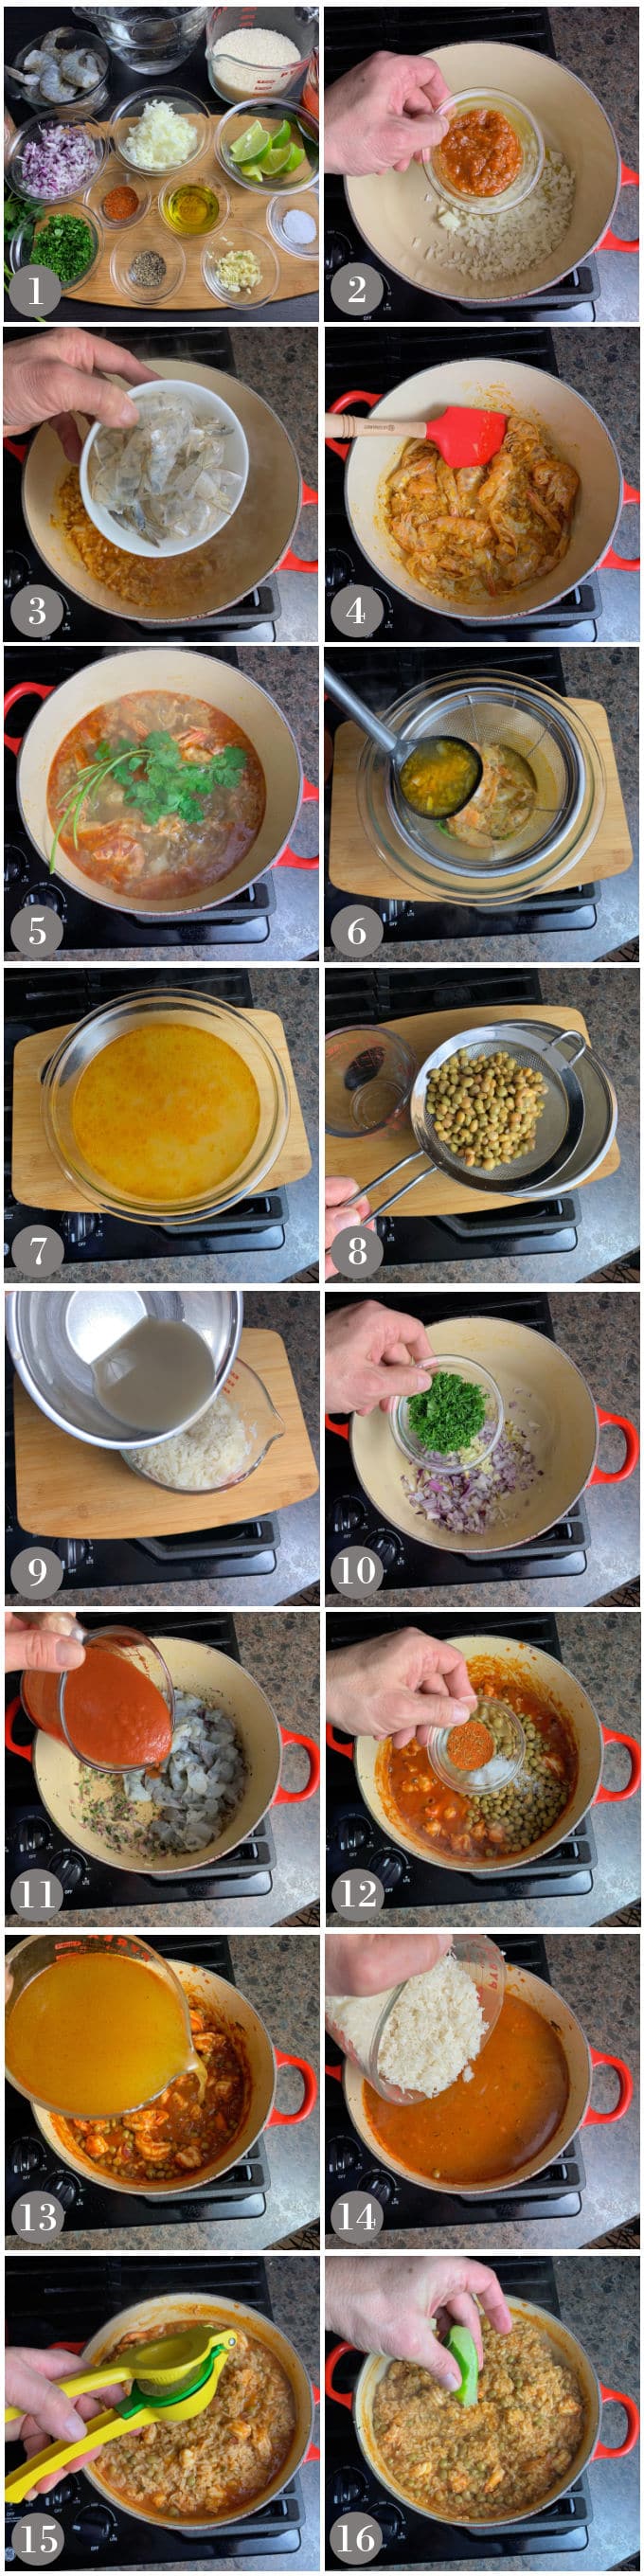 A collage of photos showing the steps to make shrimp asopao.